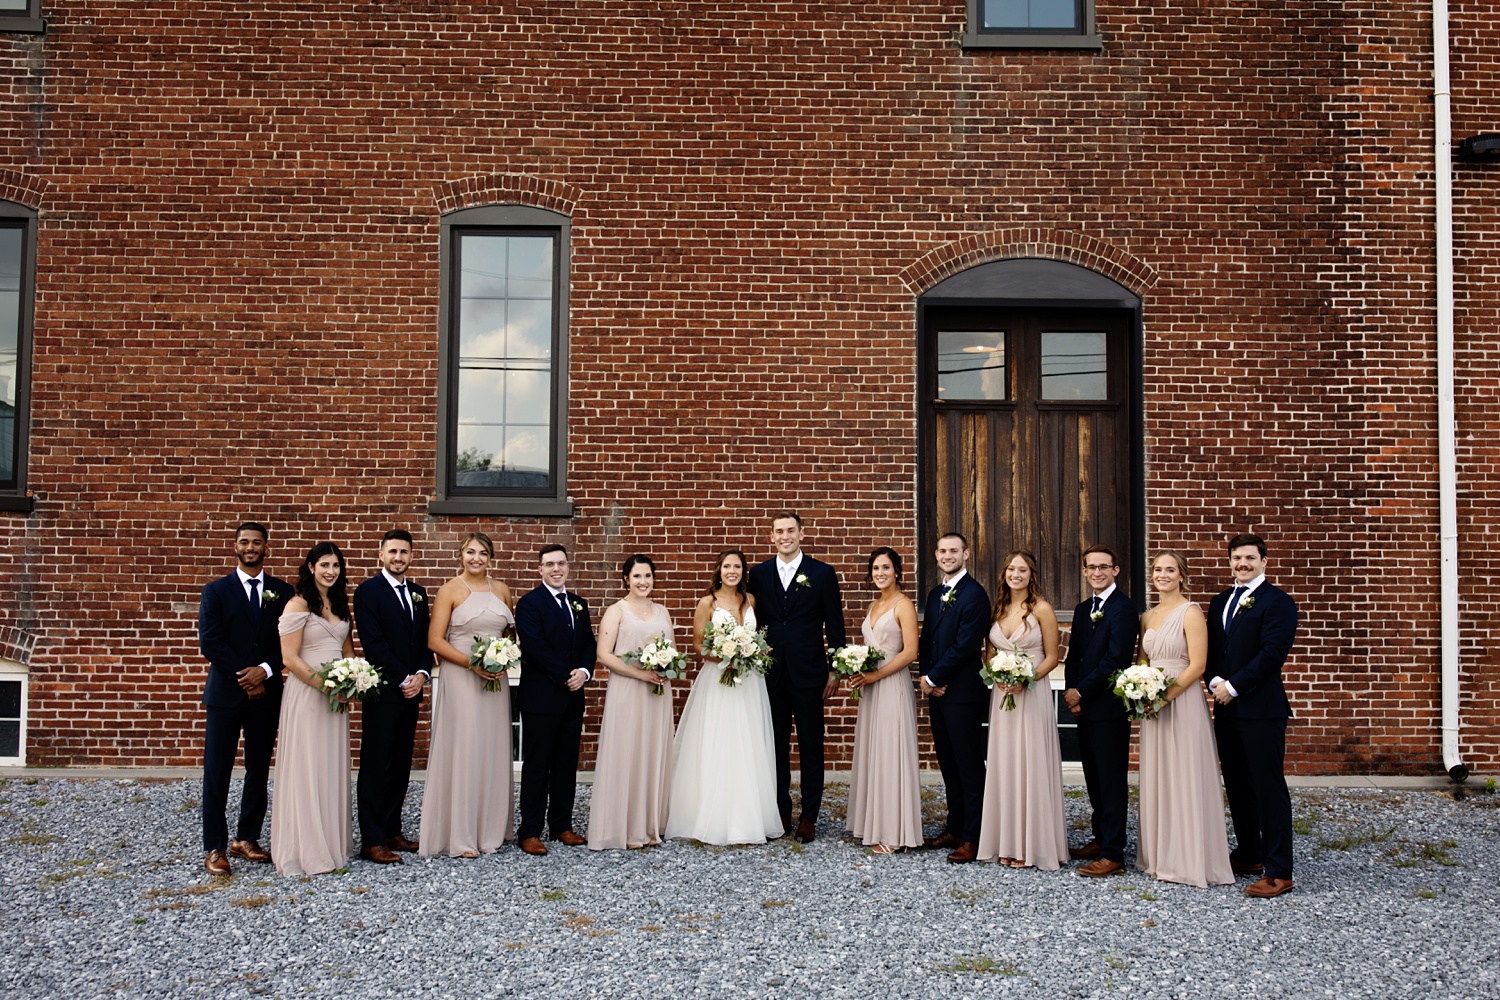 The Booking House Wedding, Lancaster PA Wedding Photographer. Romantic and Organic Wedding at Industrial Wedding Venue on the East Coast